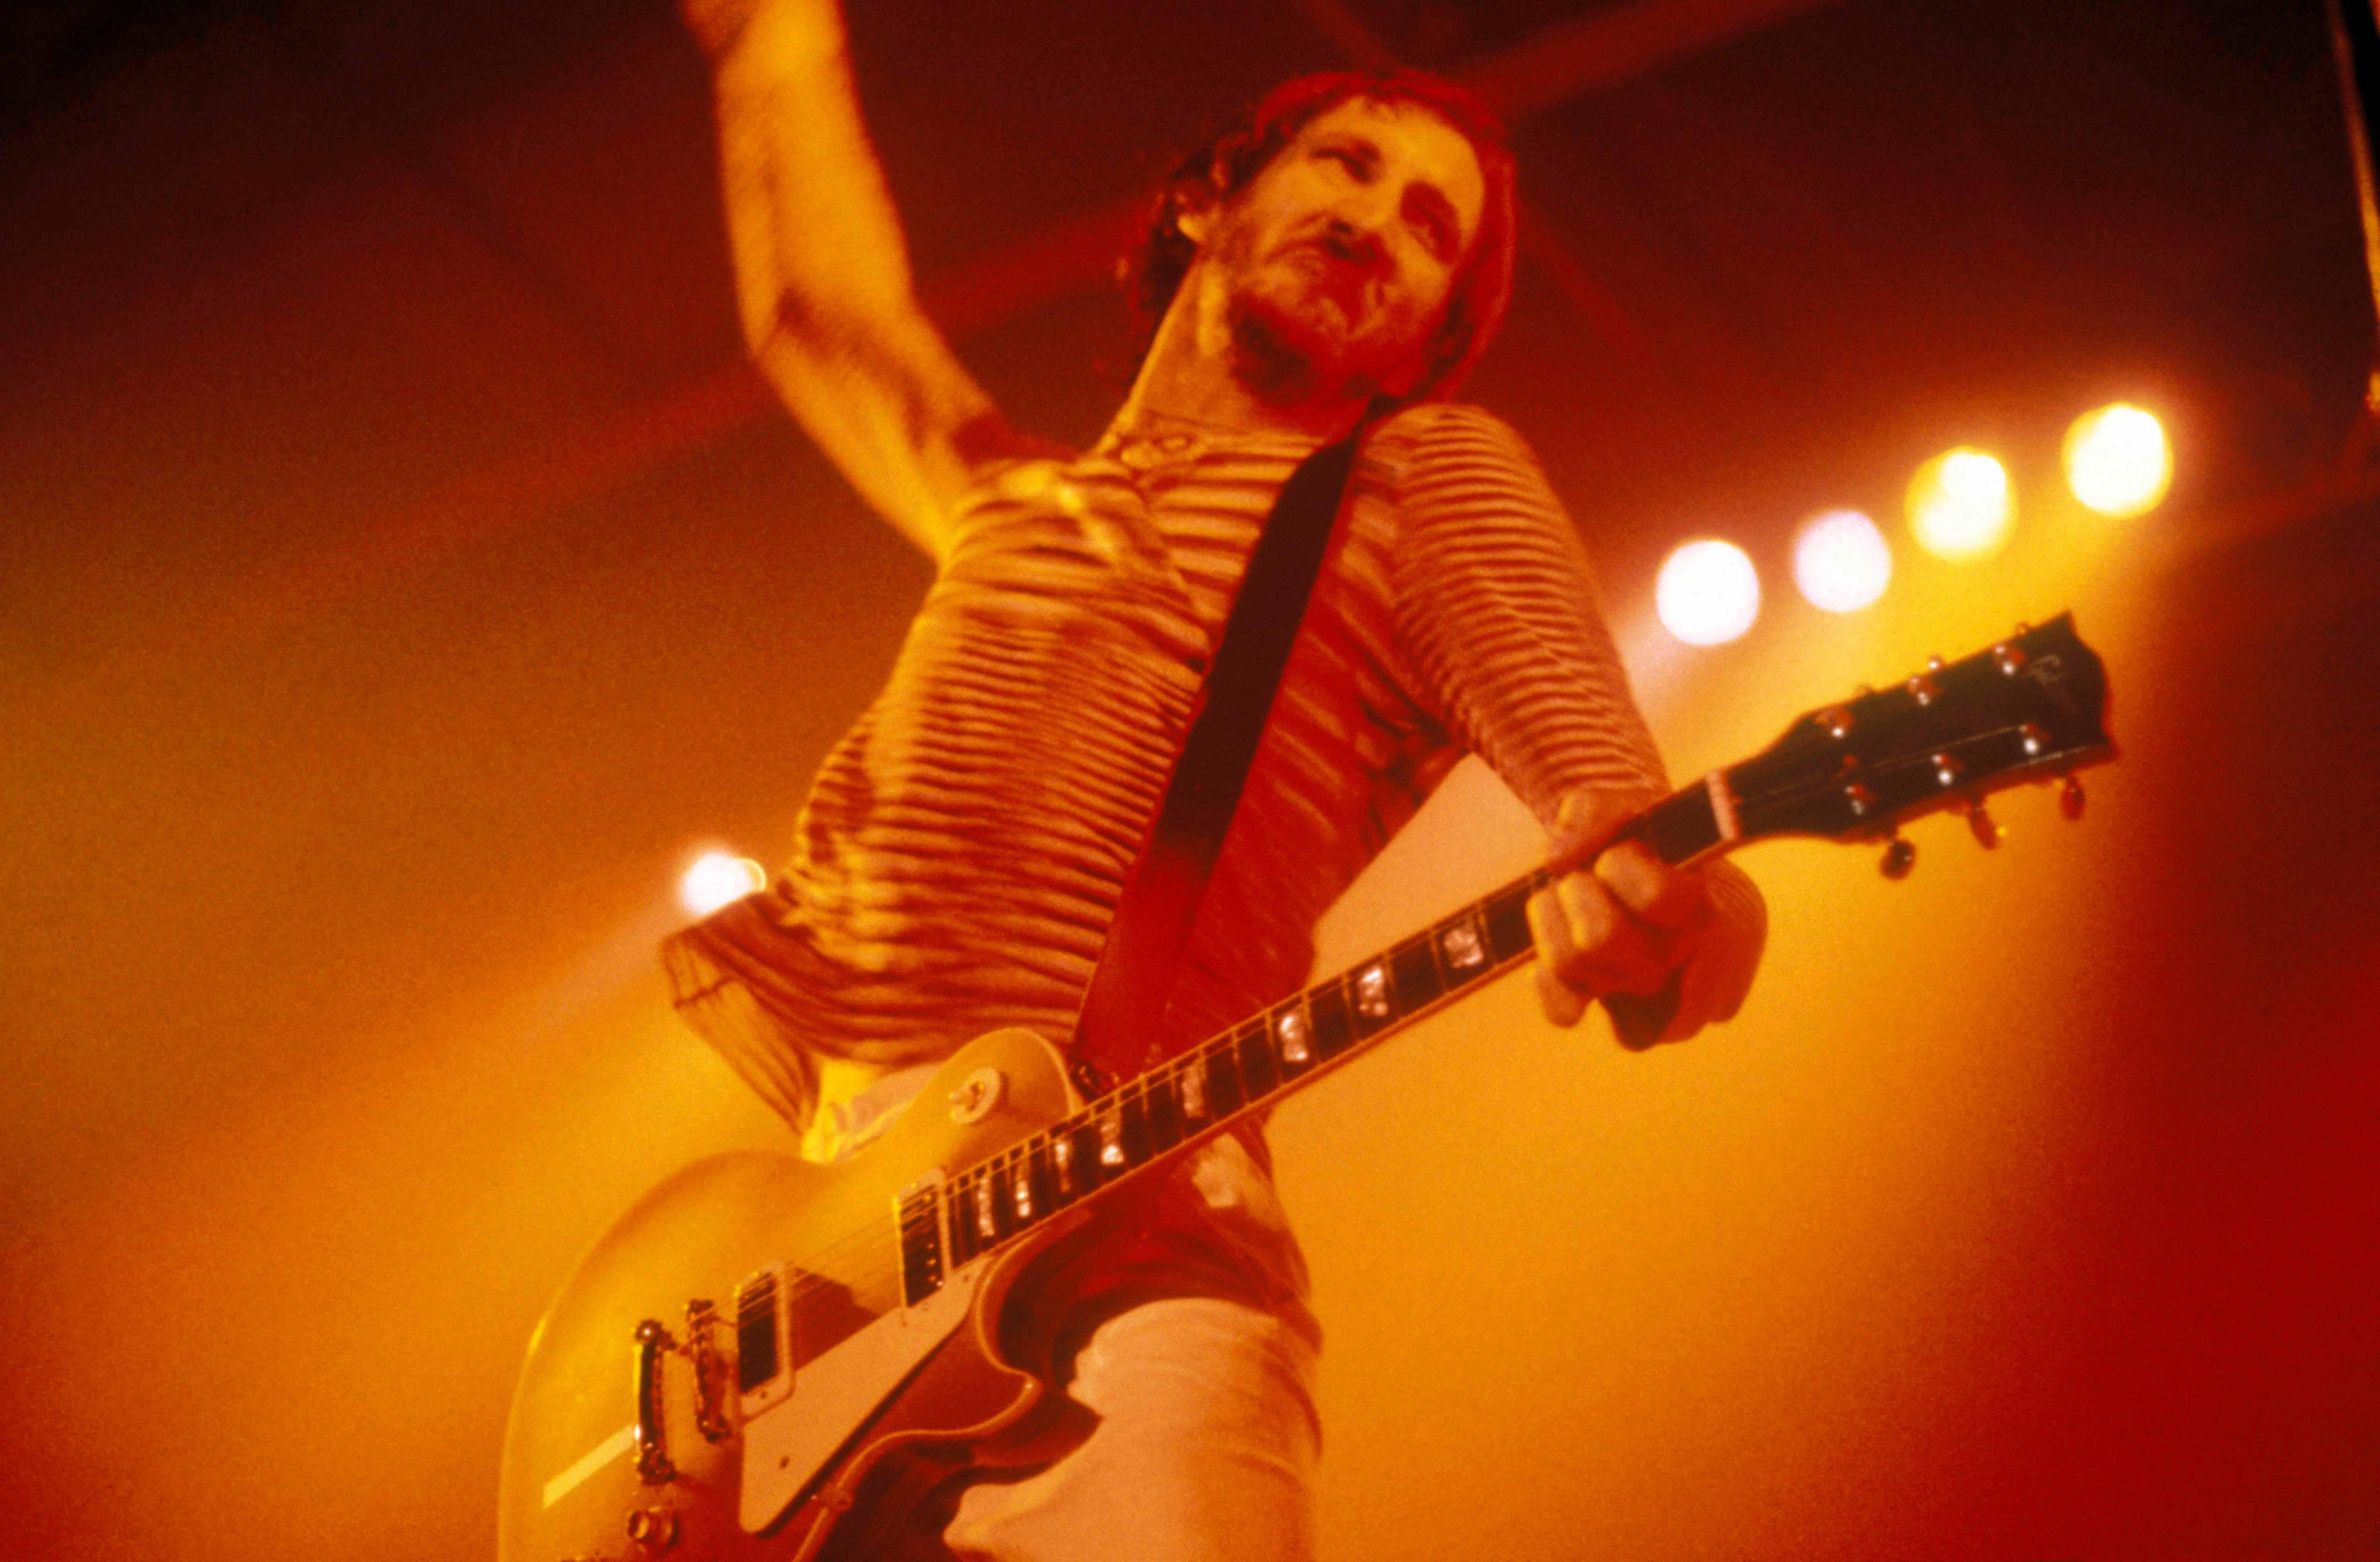 Pete Townshend with playing a Gibson Les Paul guitar doing windmill arm